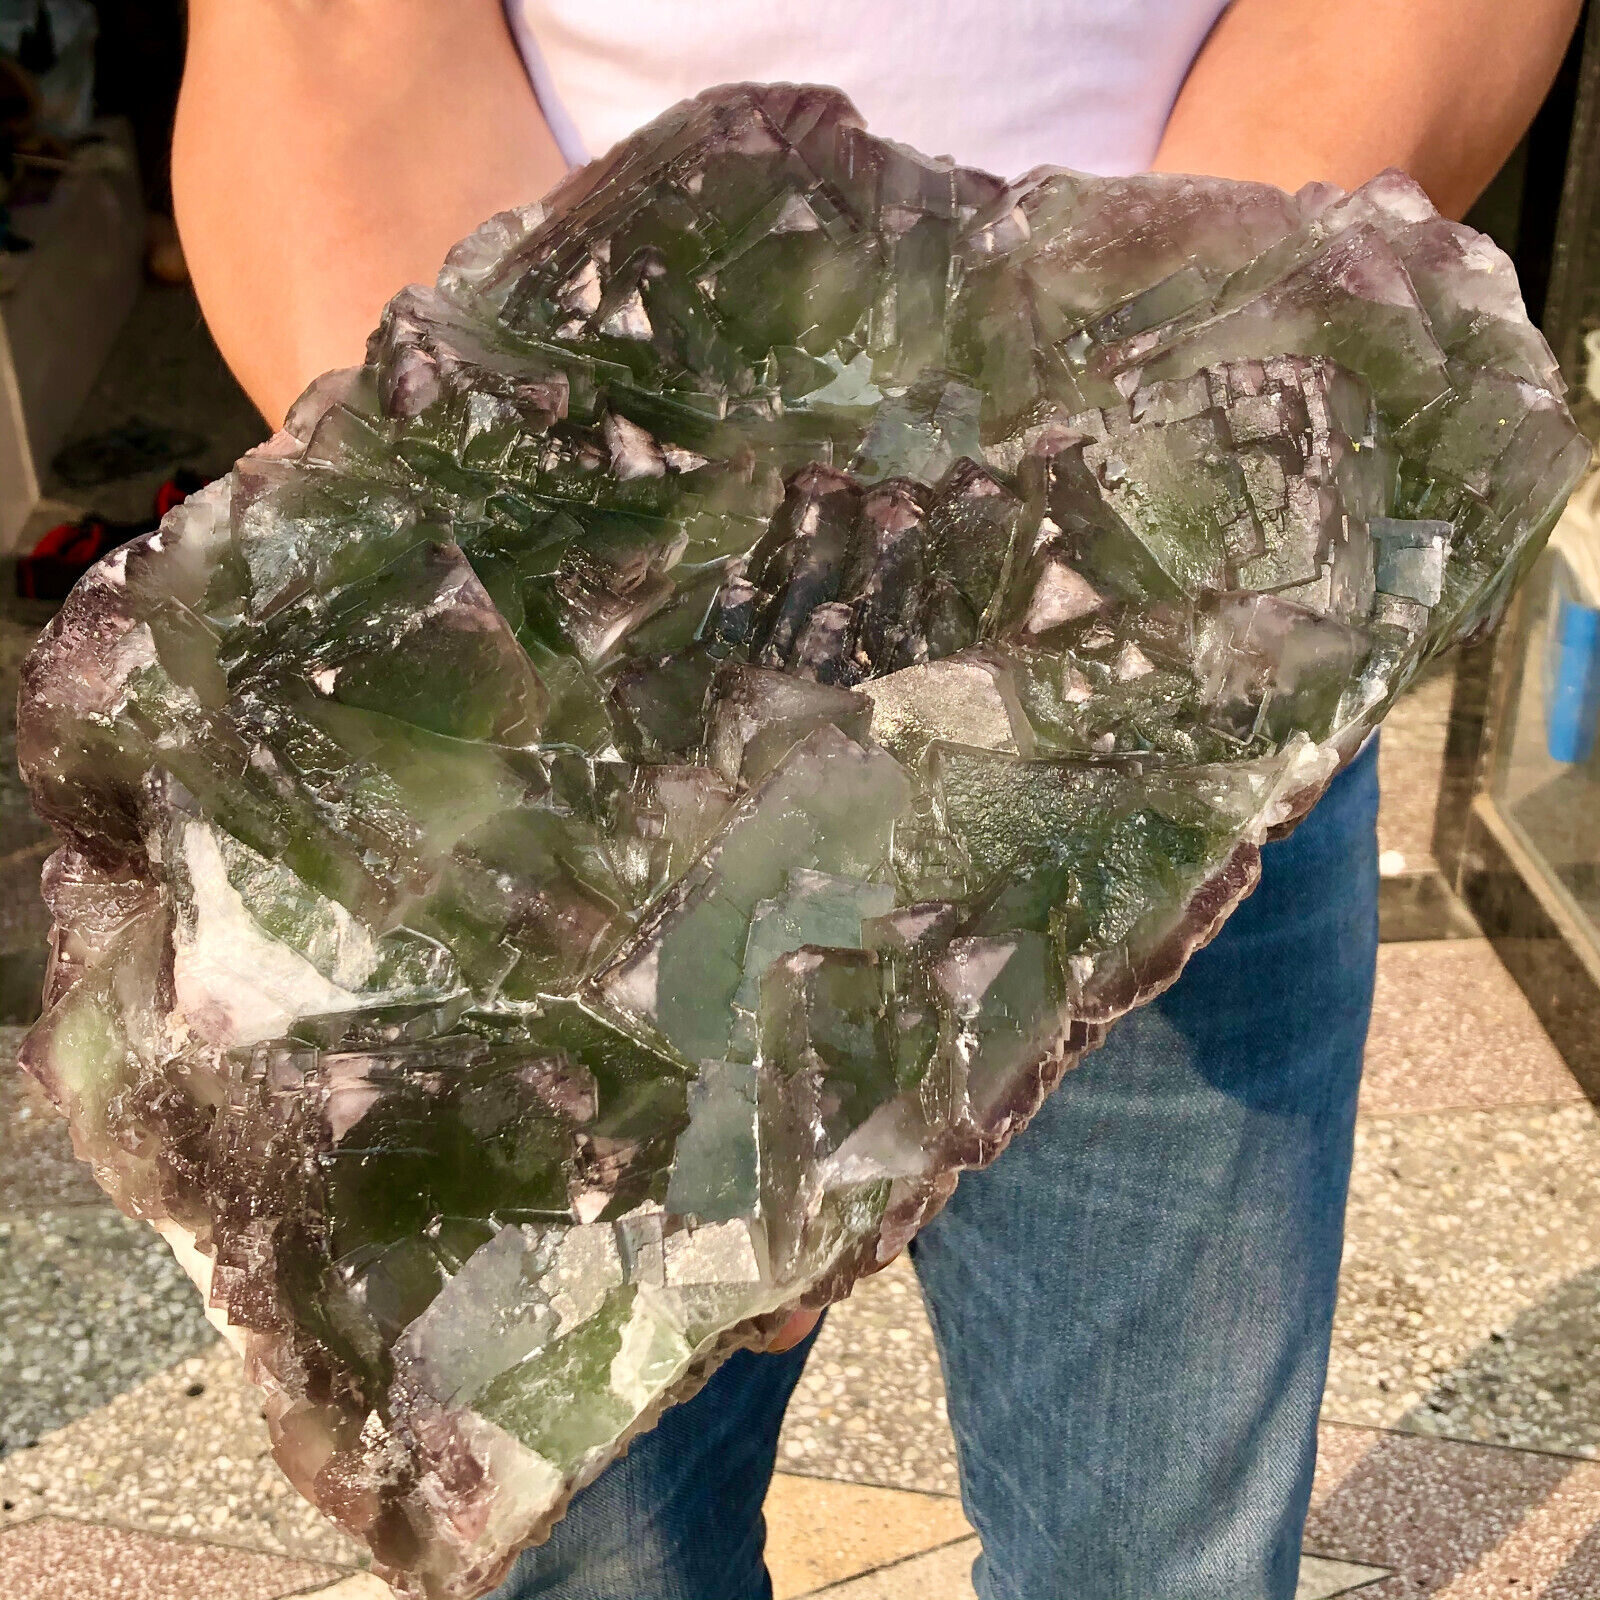 23.67lb Natural cubic Fluorite Crystal Cluster mineral sample healing